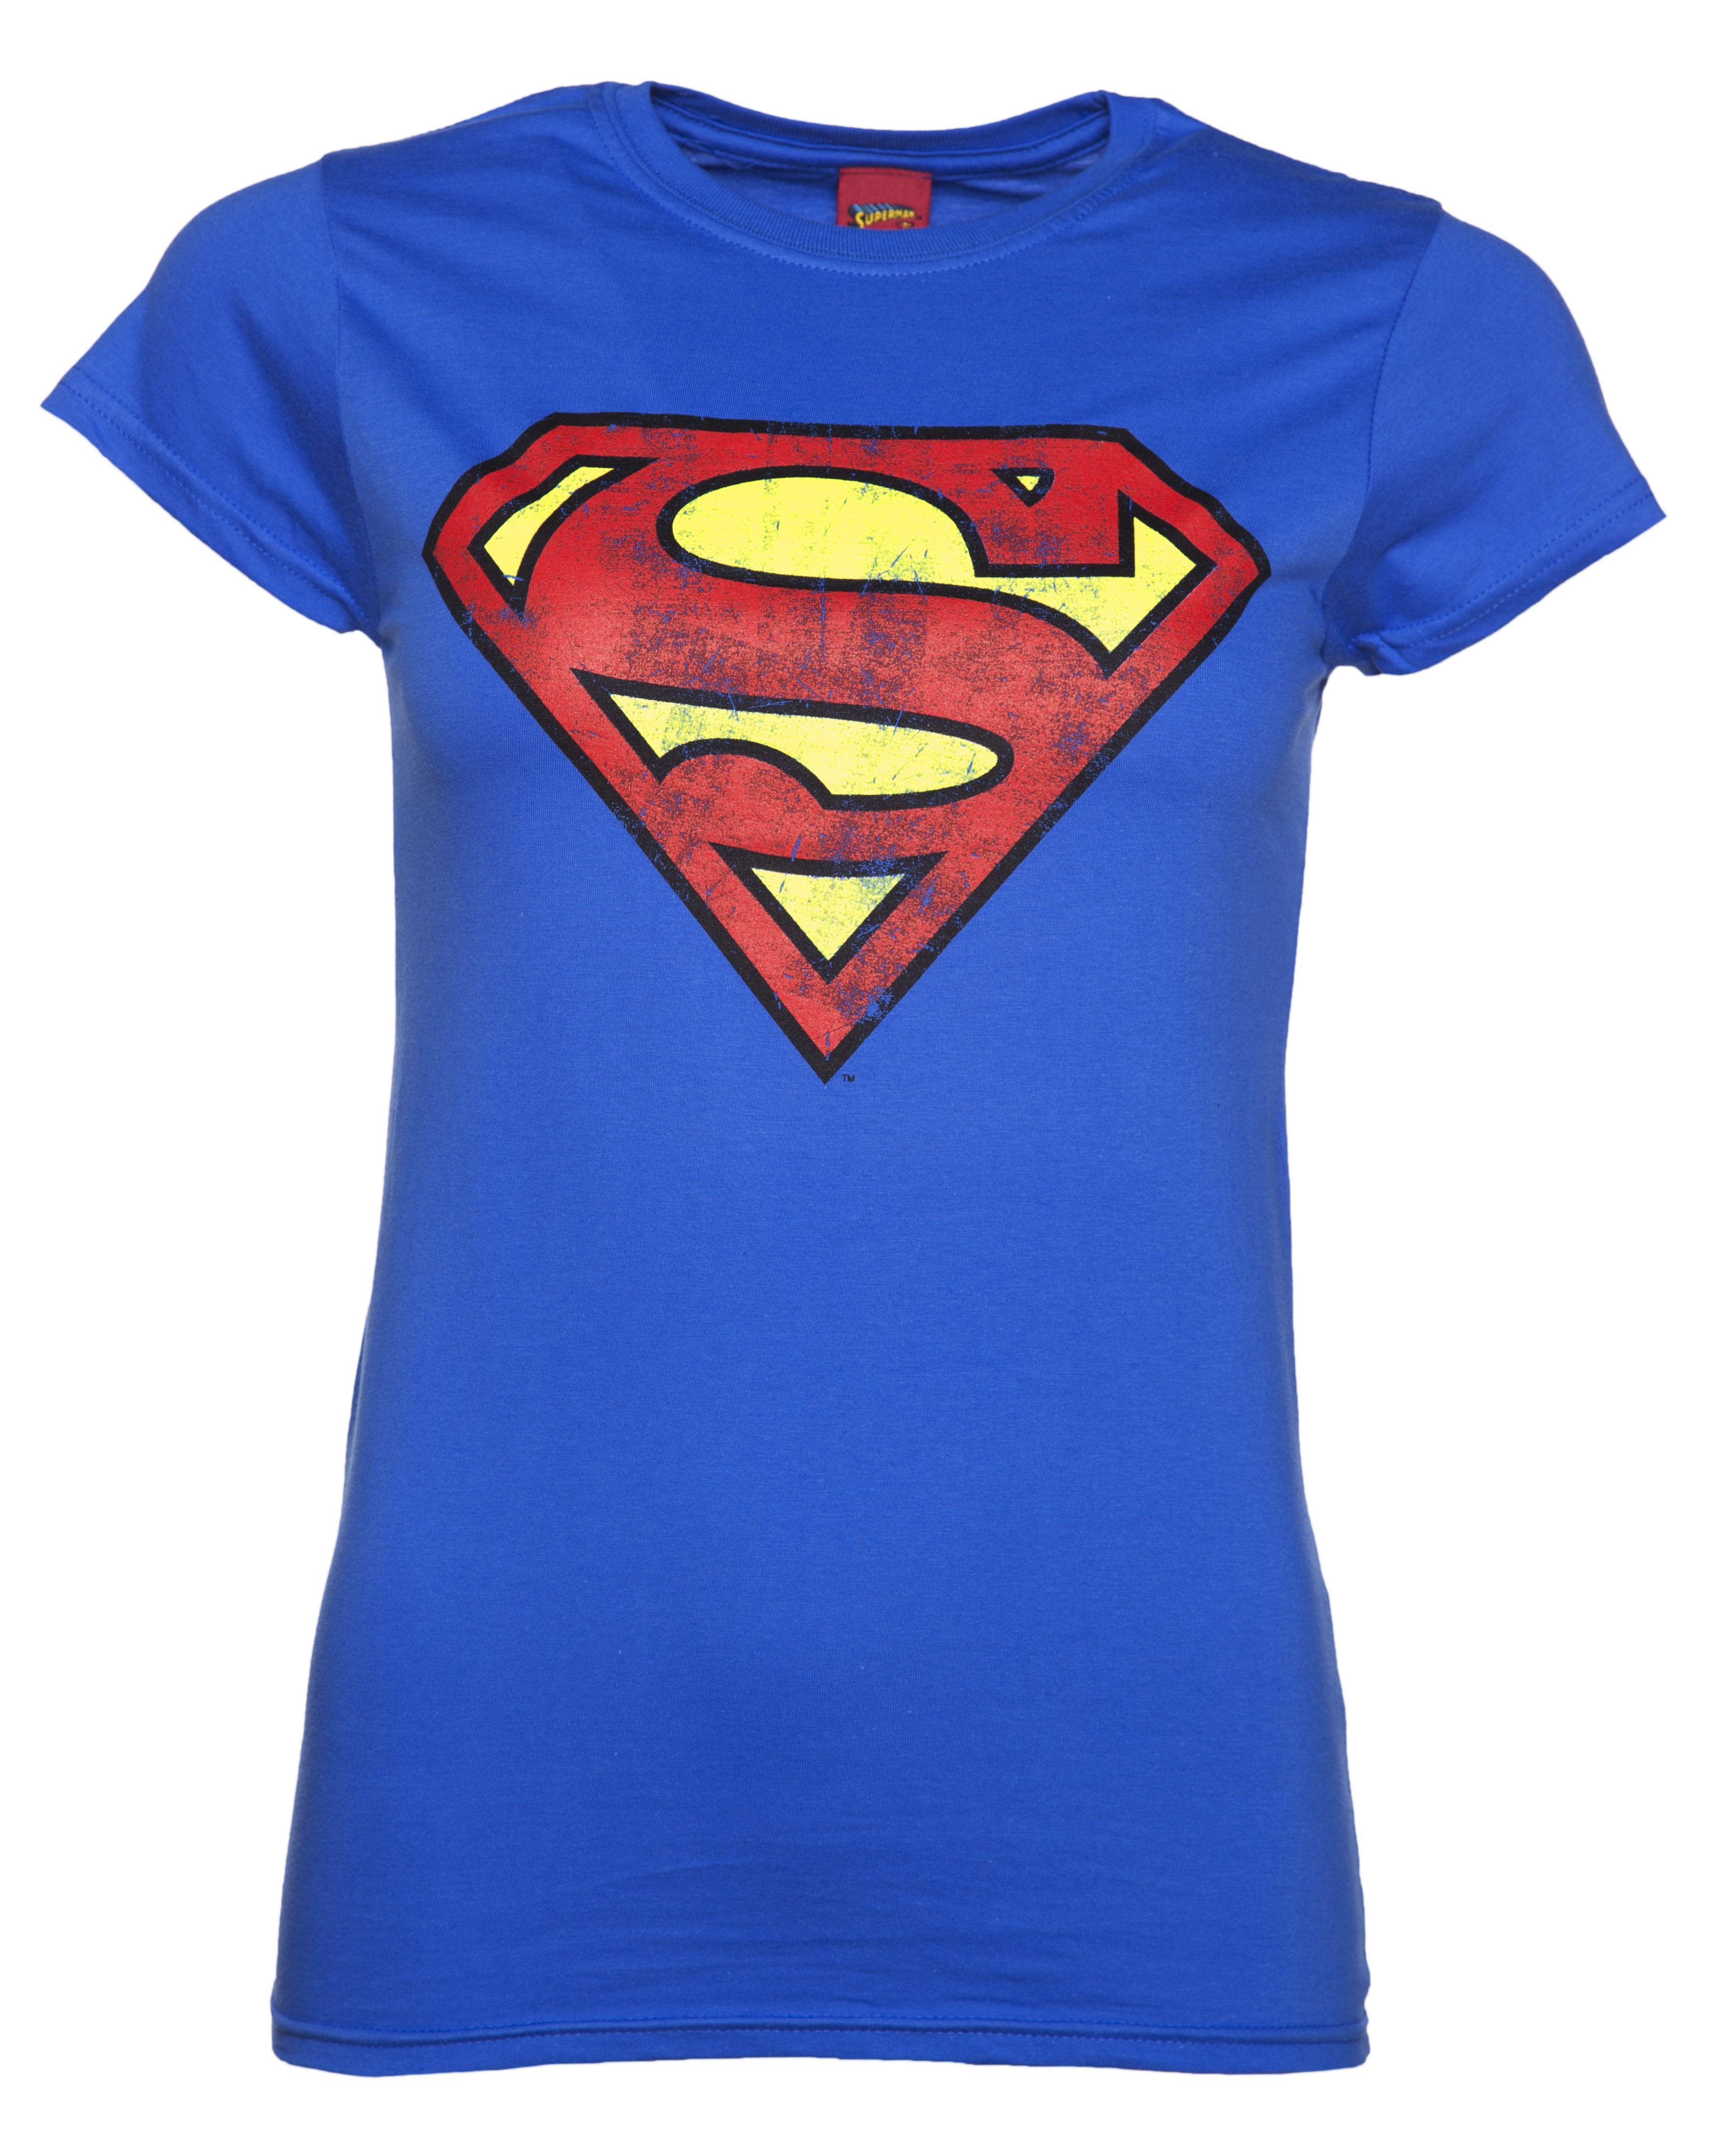 Distressed Superman Logo - Official Superman T-Shirts, Tops, Accessories and Gifts ...